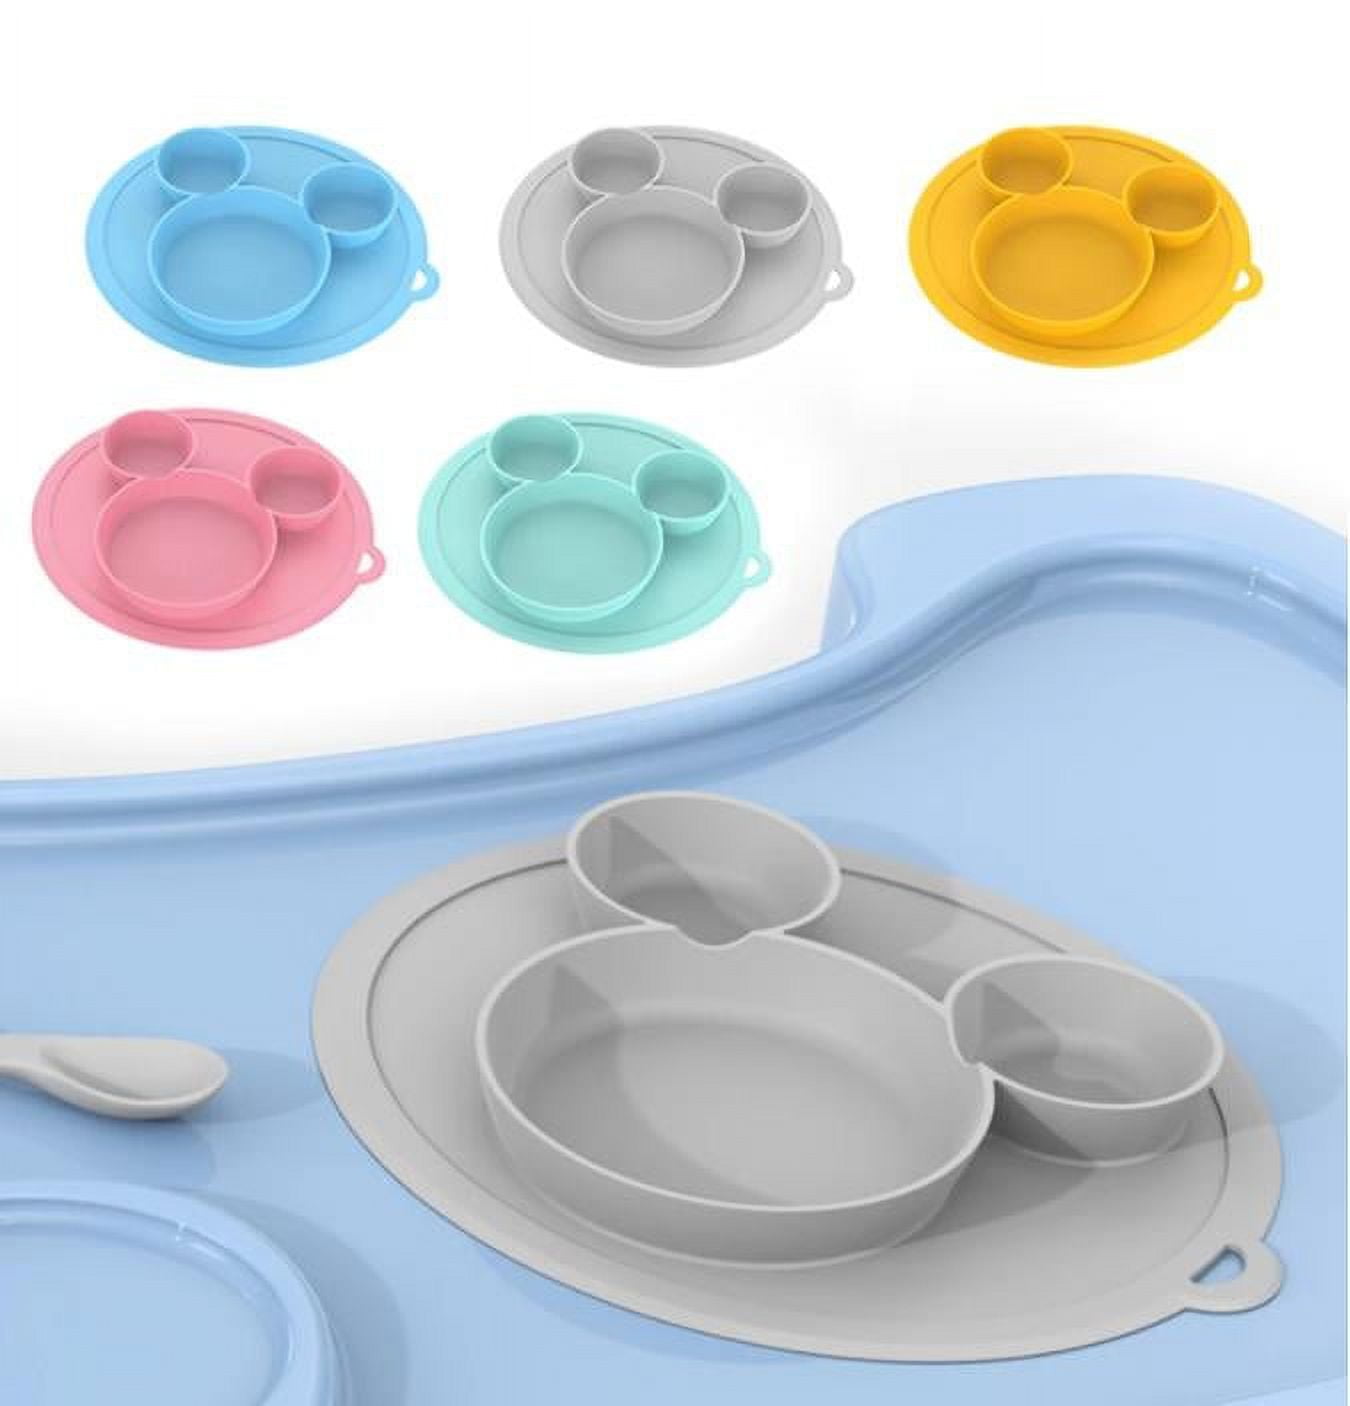 Lnkoo Baby Suction Silicone Plate, Portable Silicone Divided Placemat for Toddlers, Waterproof Baby Placemat Travel Food Mat Non-Slip Silicone